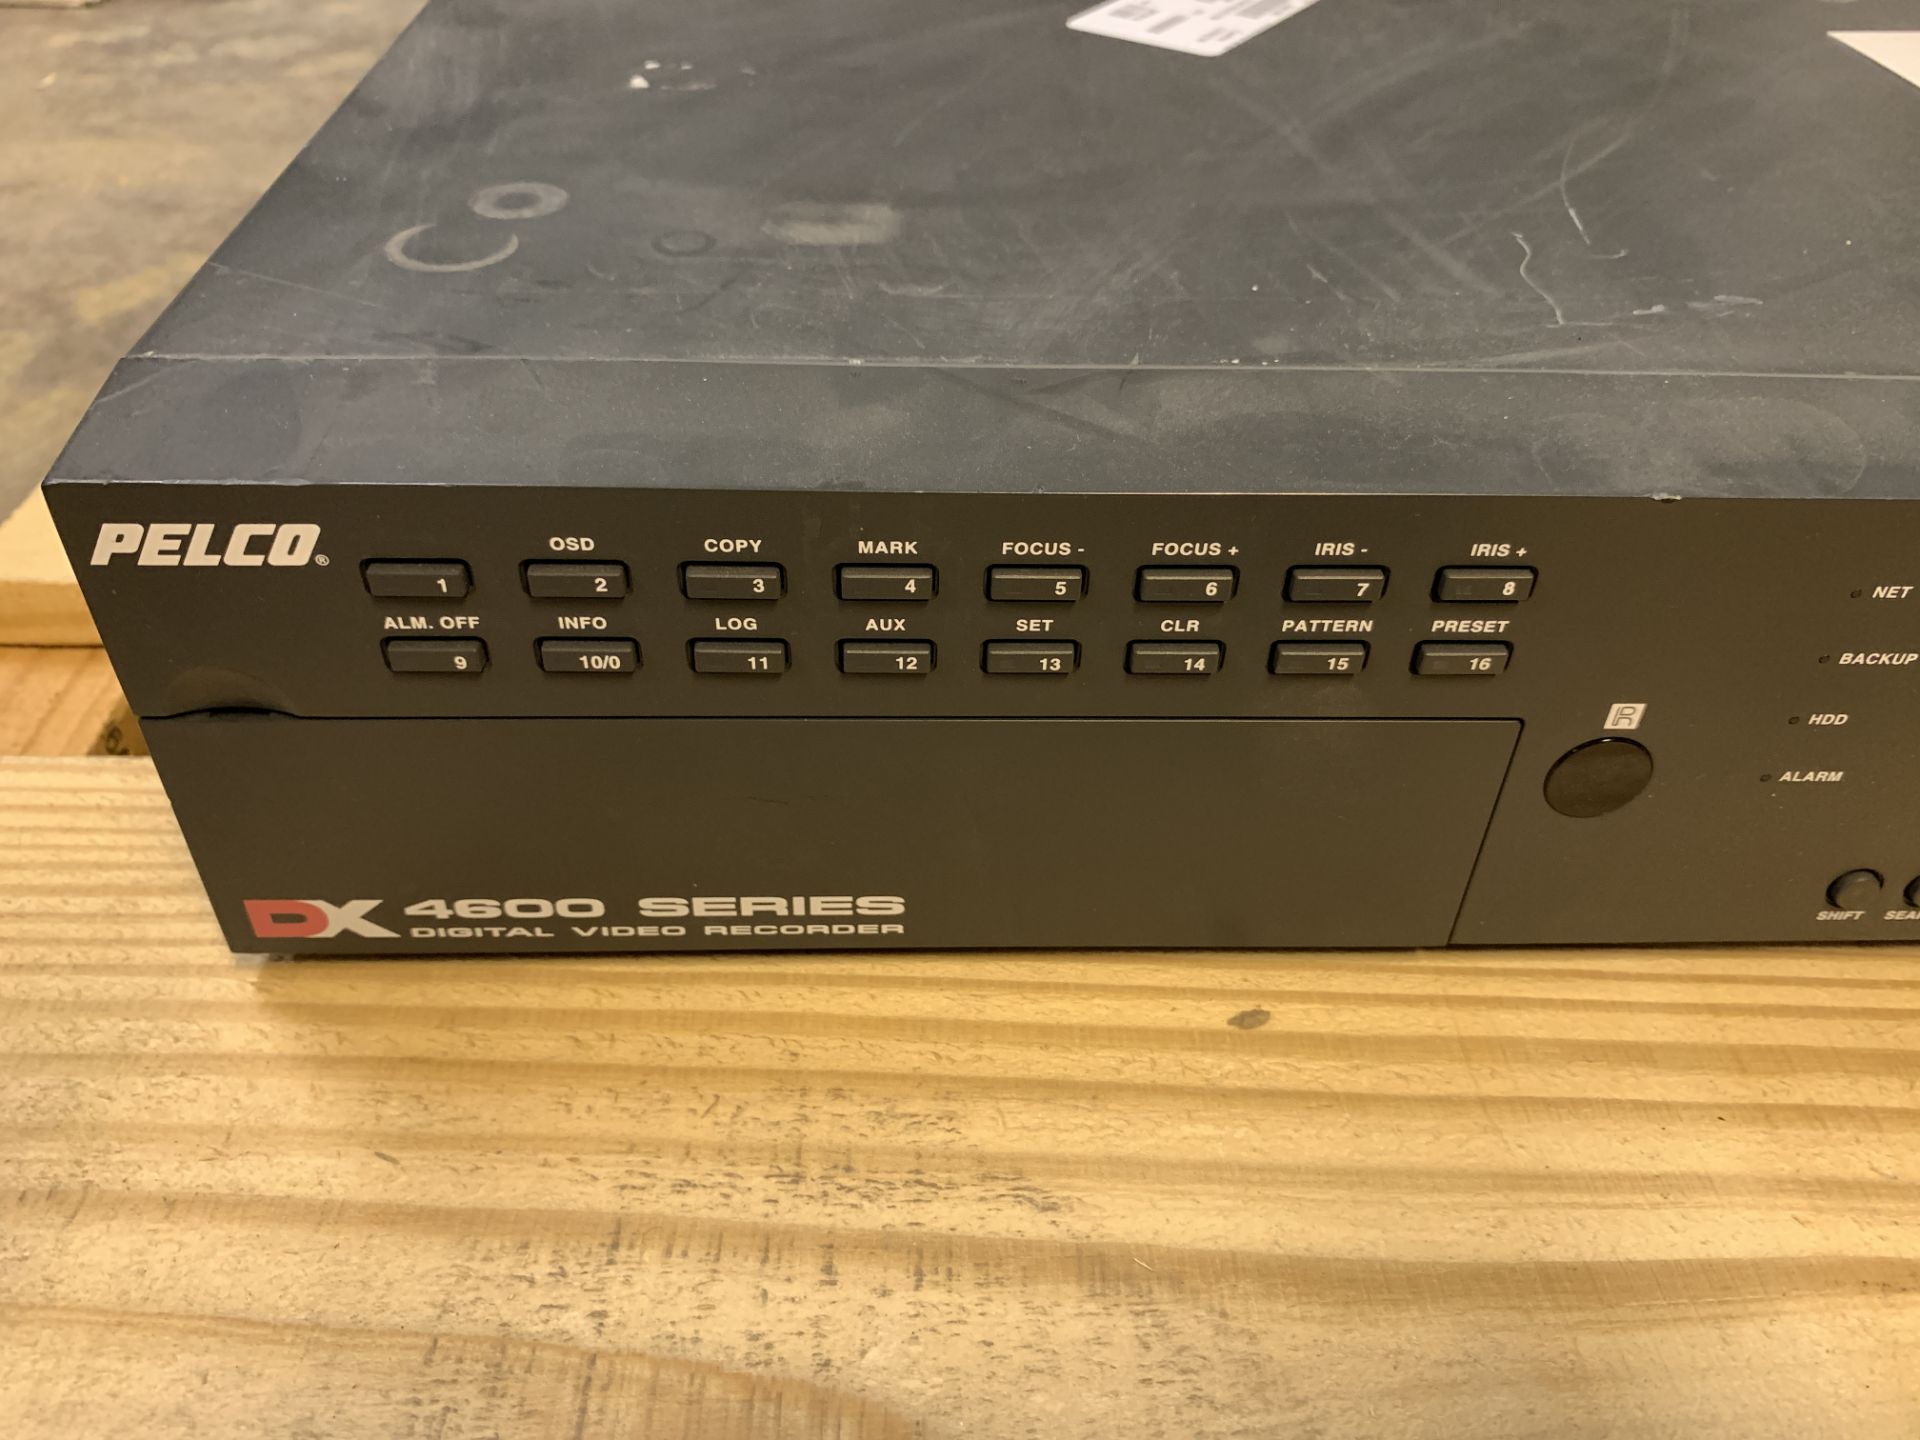 PELCO DX 4600 SERIES DIGITAL VIDEO RECORDER - Image 2 of 5